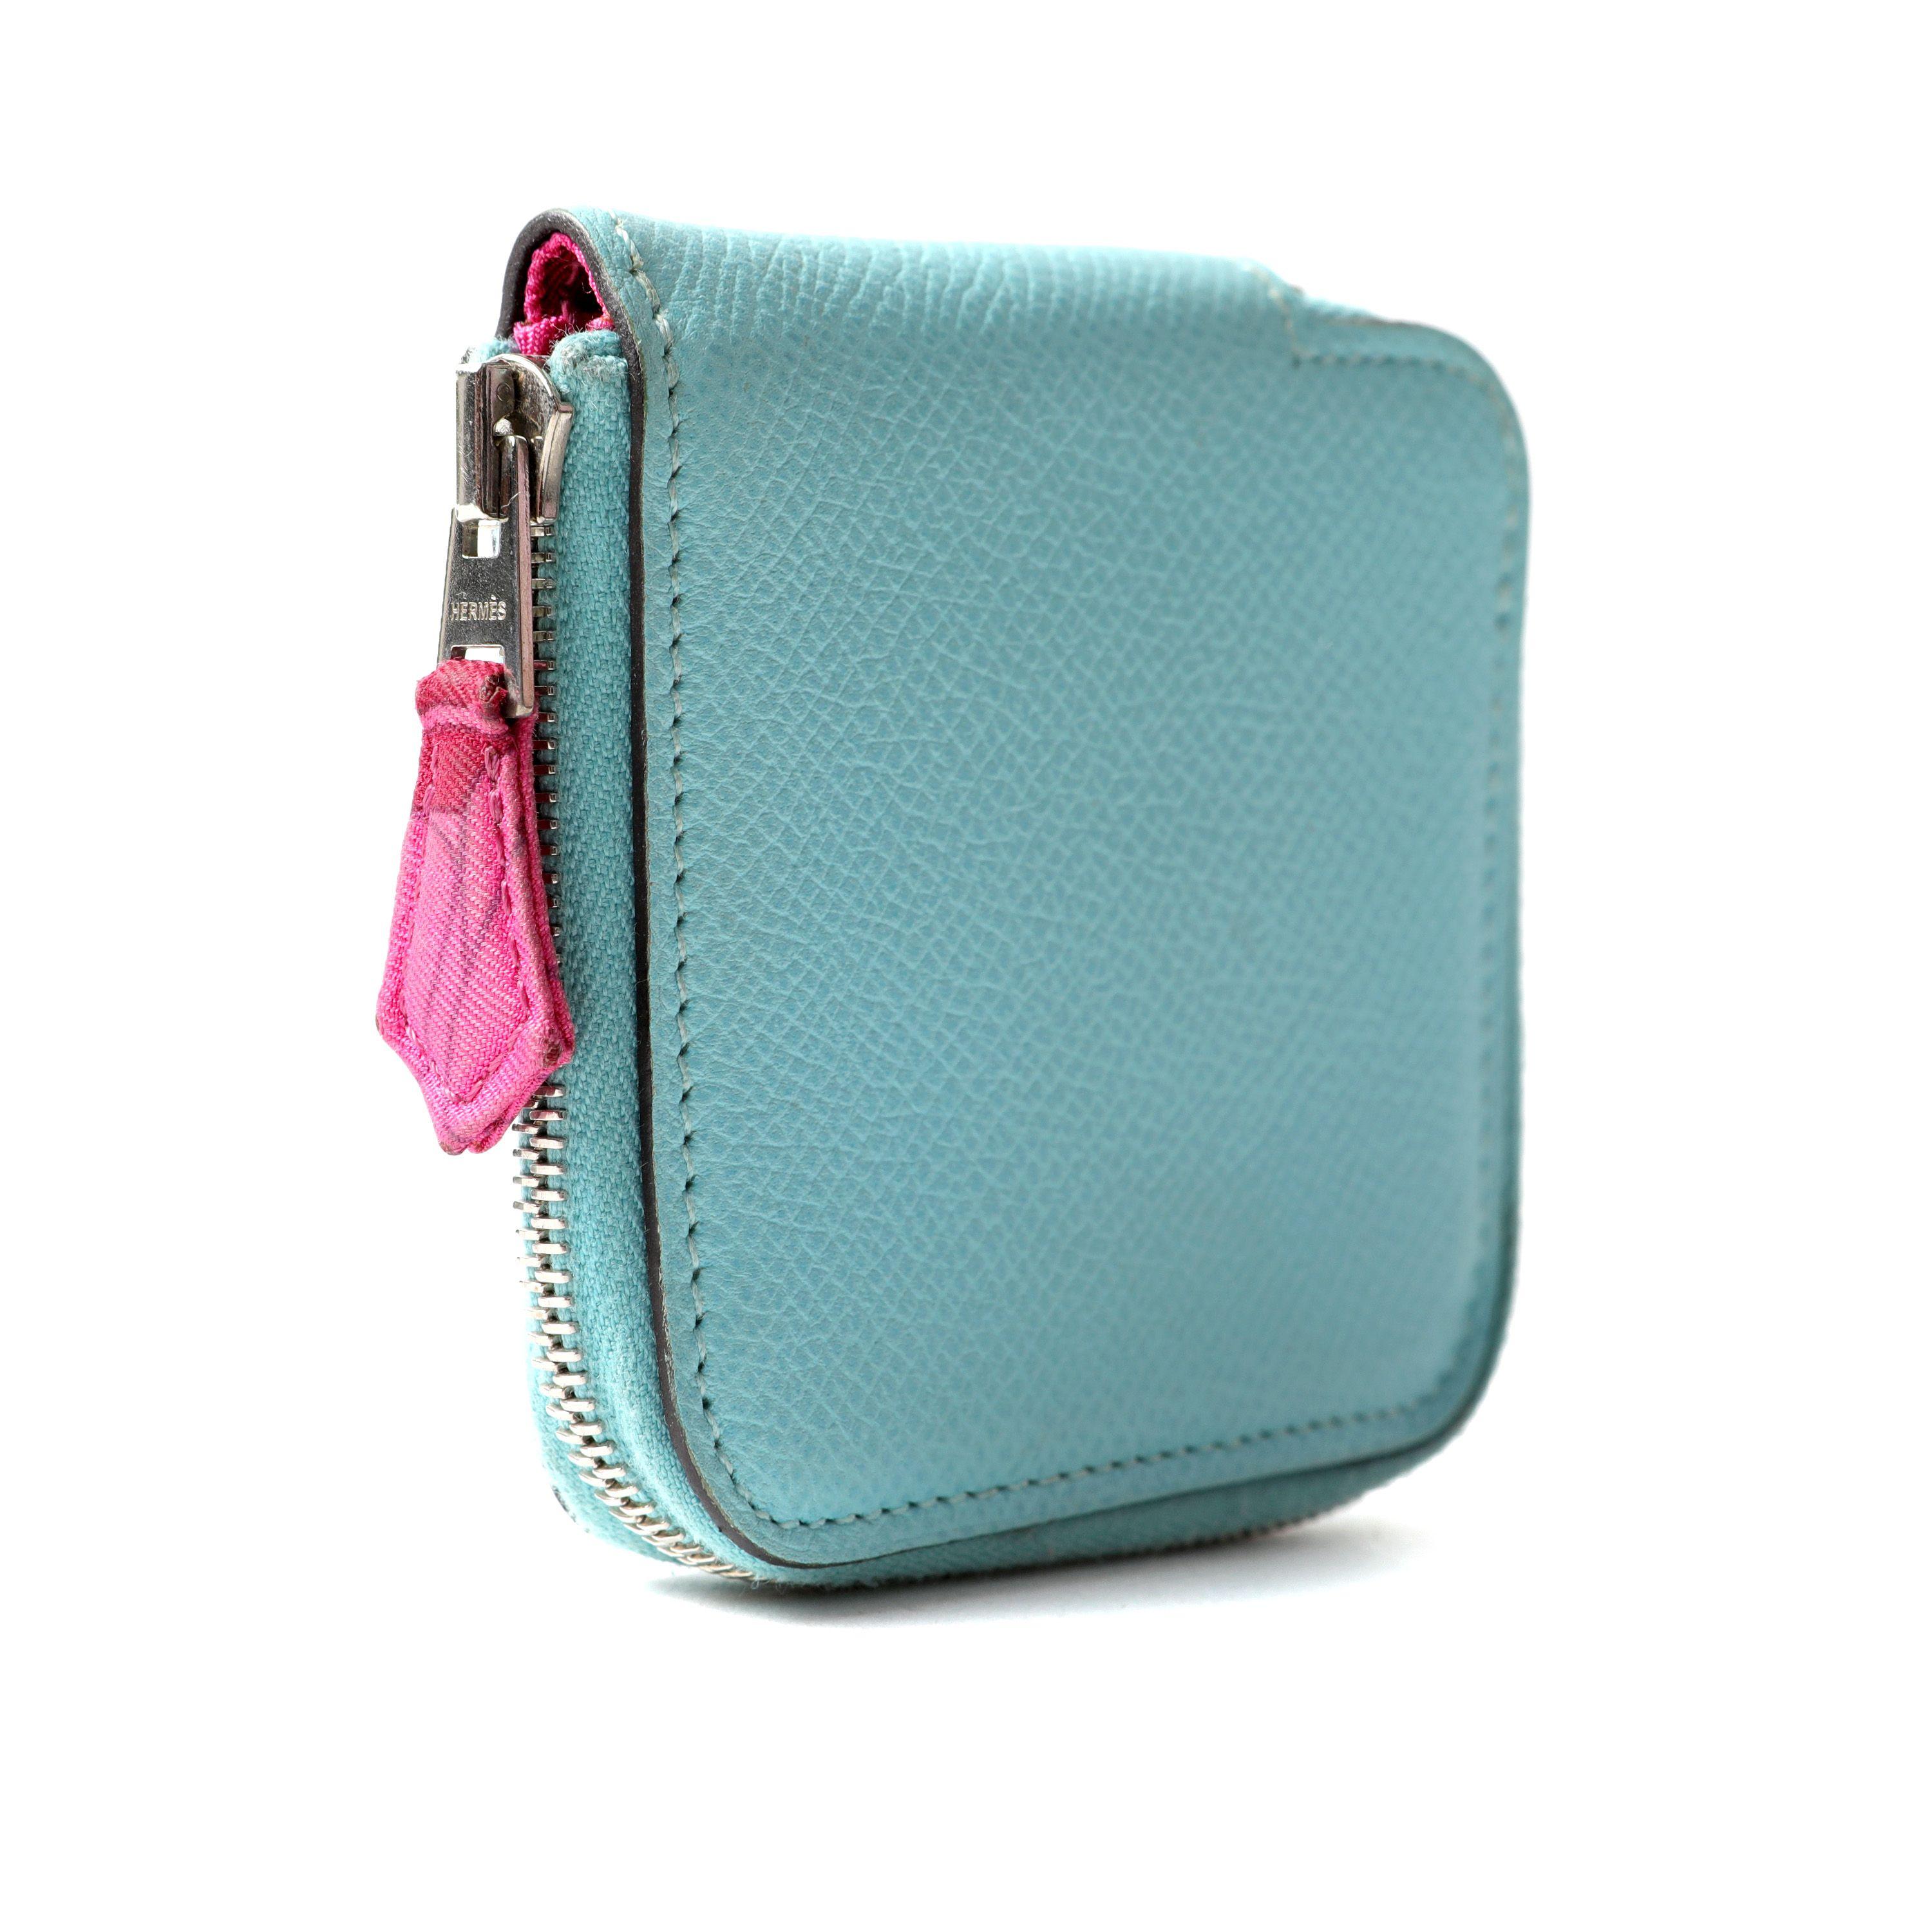 This authentic Hermès Robins Egg Blue Epsom Small Change Purse is in very good condition.  Blue durable Epsom leather with silver tone zip around opening. Pink silk lining.  Made in France.

PBF 12893